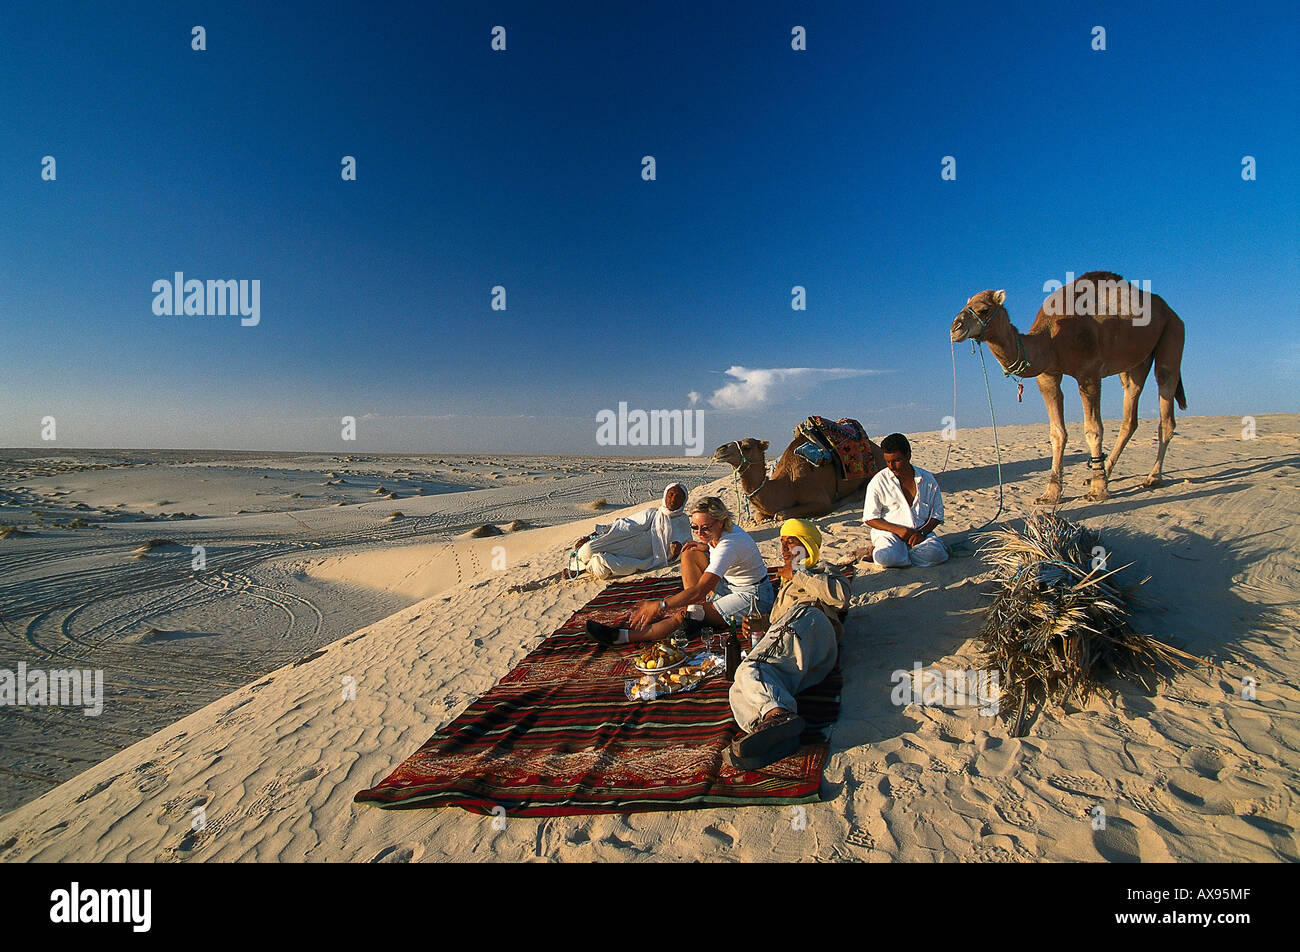 Picnic in the desert with local people, Dunes near Nefta, Tunesia Stock Photo